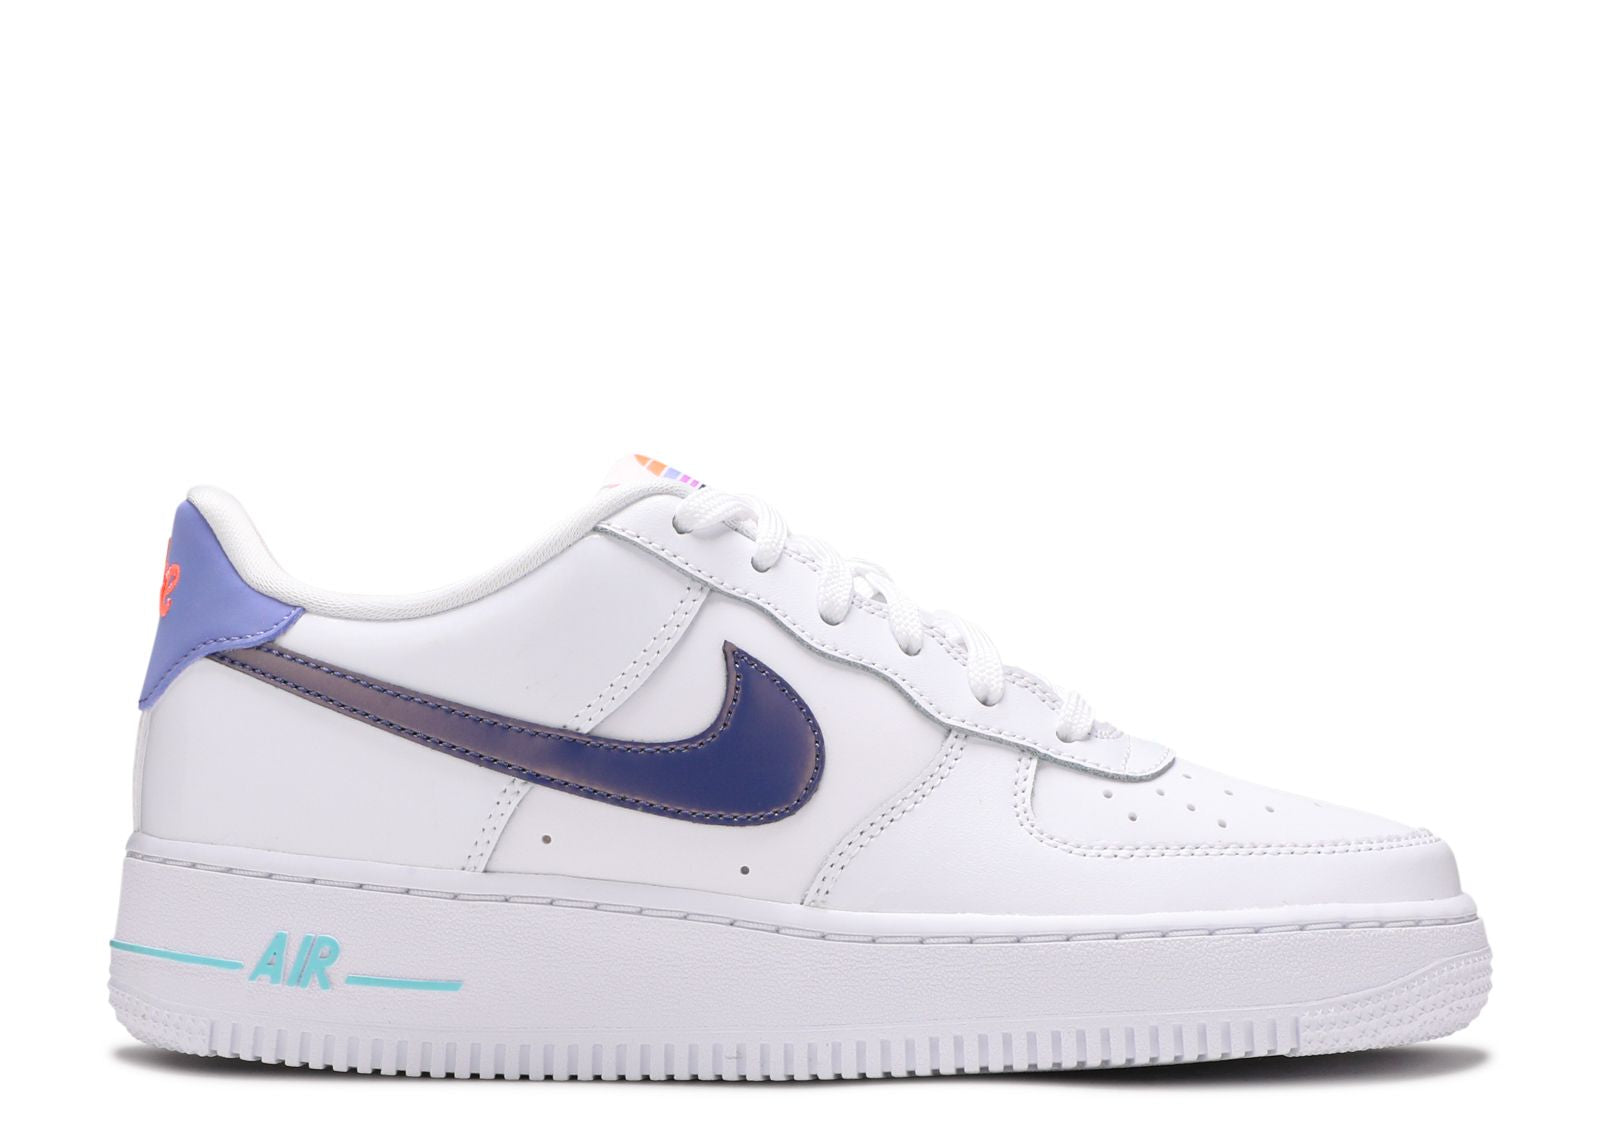 Second Chance - champion nike Air Force 1 White Dark Purple Dust (GS) - 38 | NEW